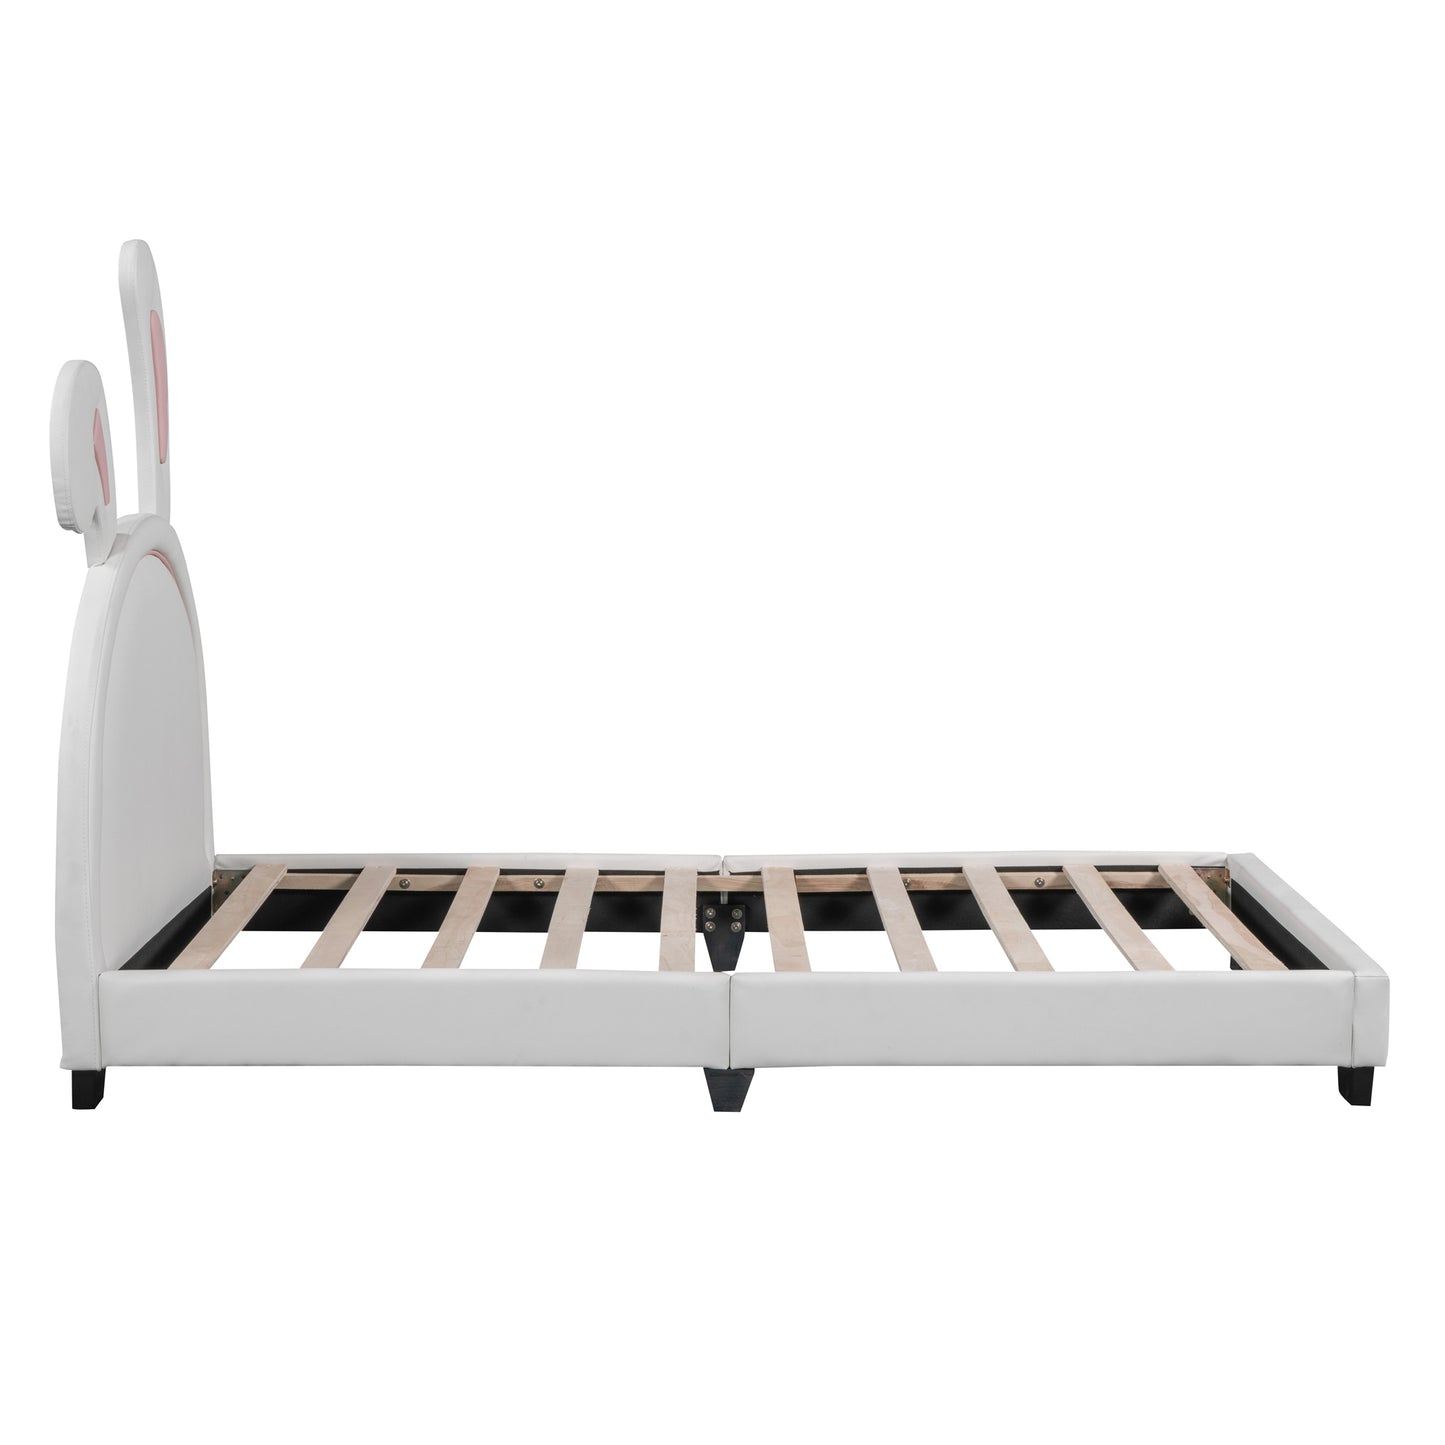 Twin Size Upholstered Leather Platform Bed with Rabbit Ornament, White